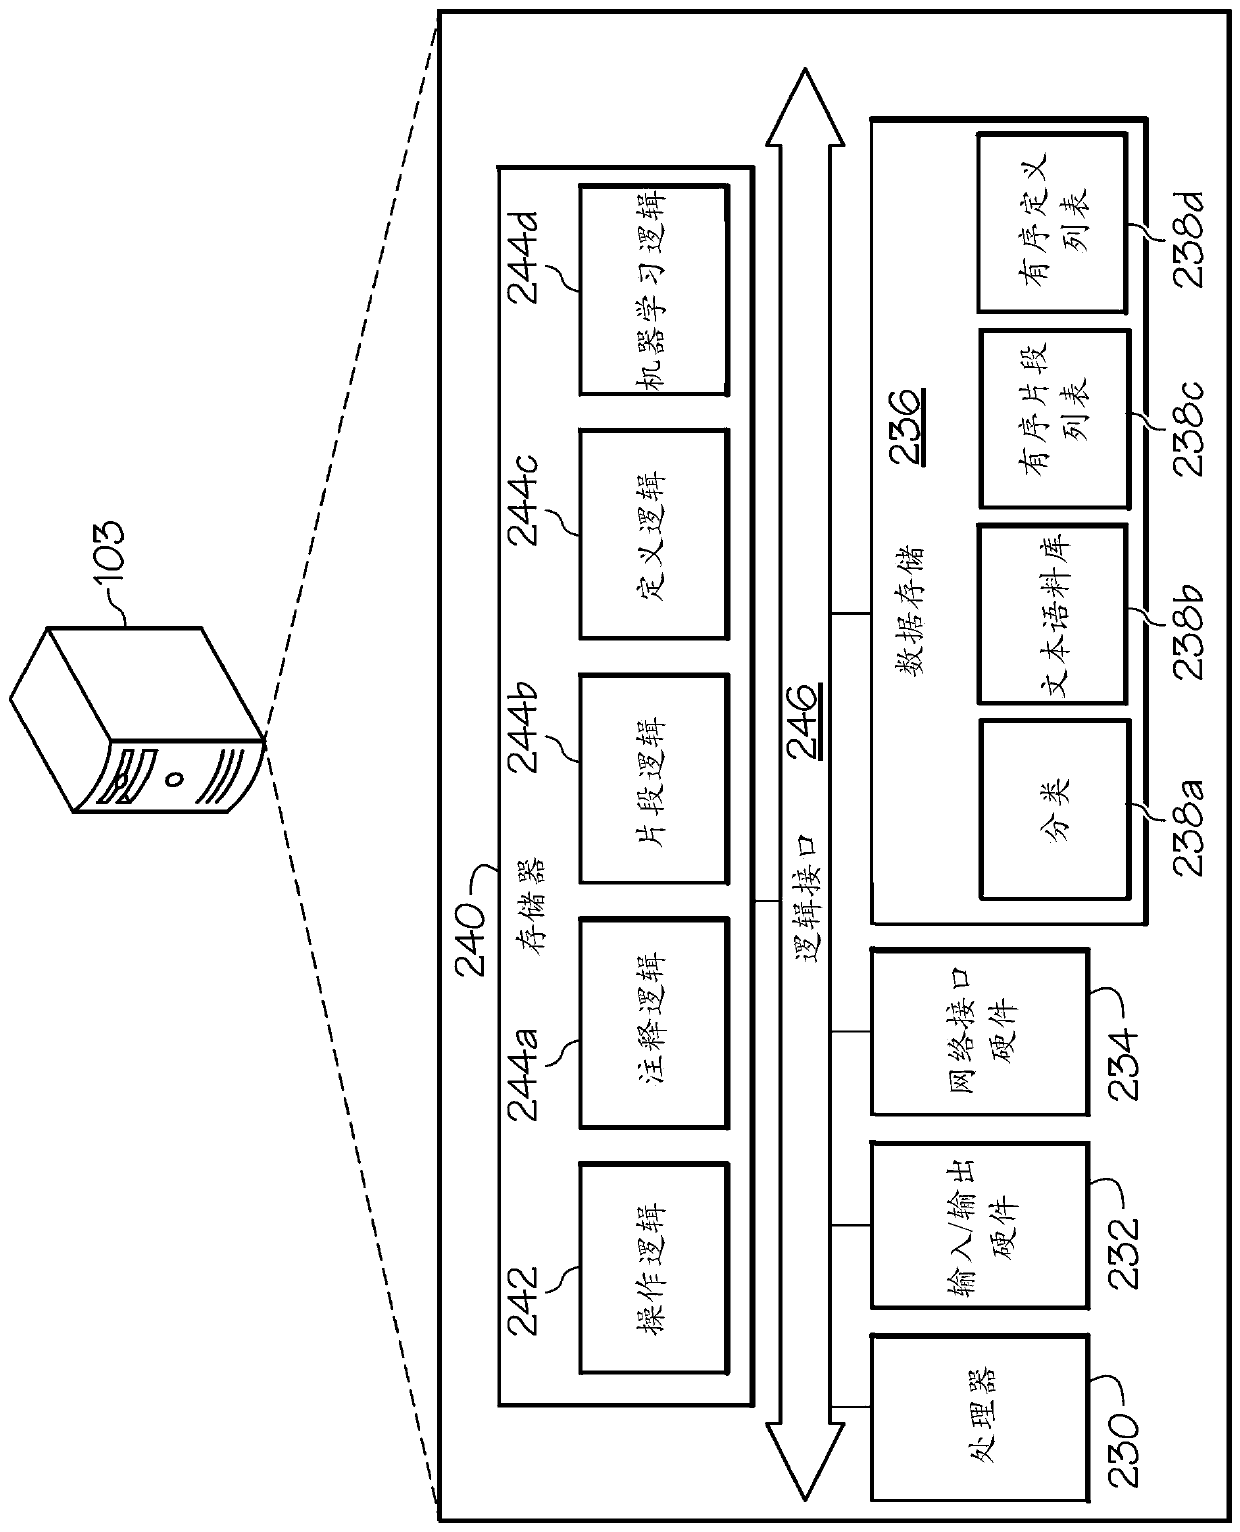 Systems and methods for automatically generating content summaries for topics